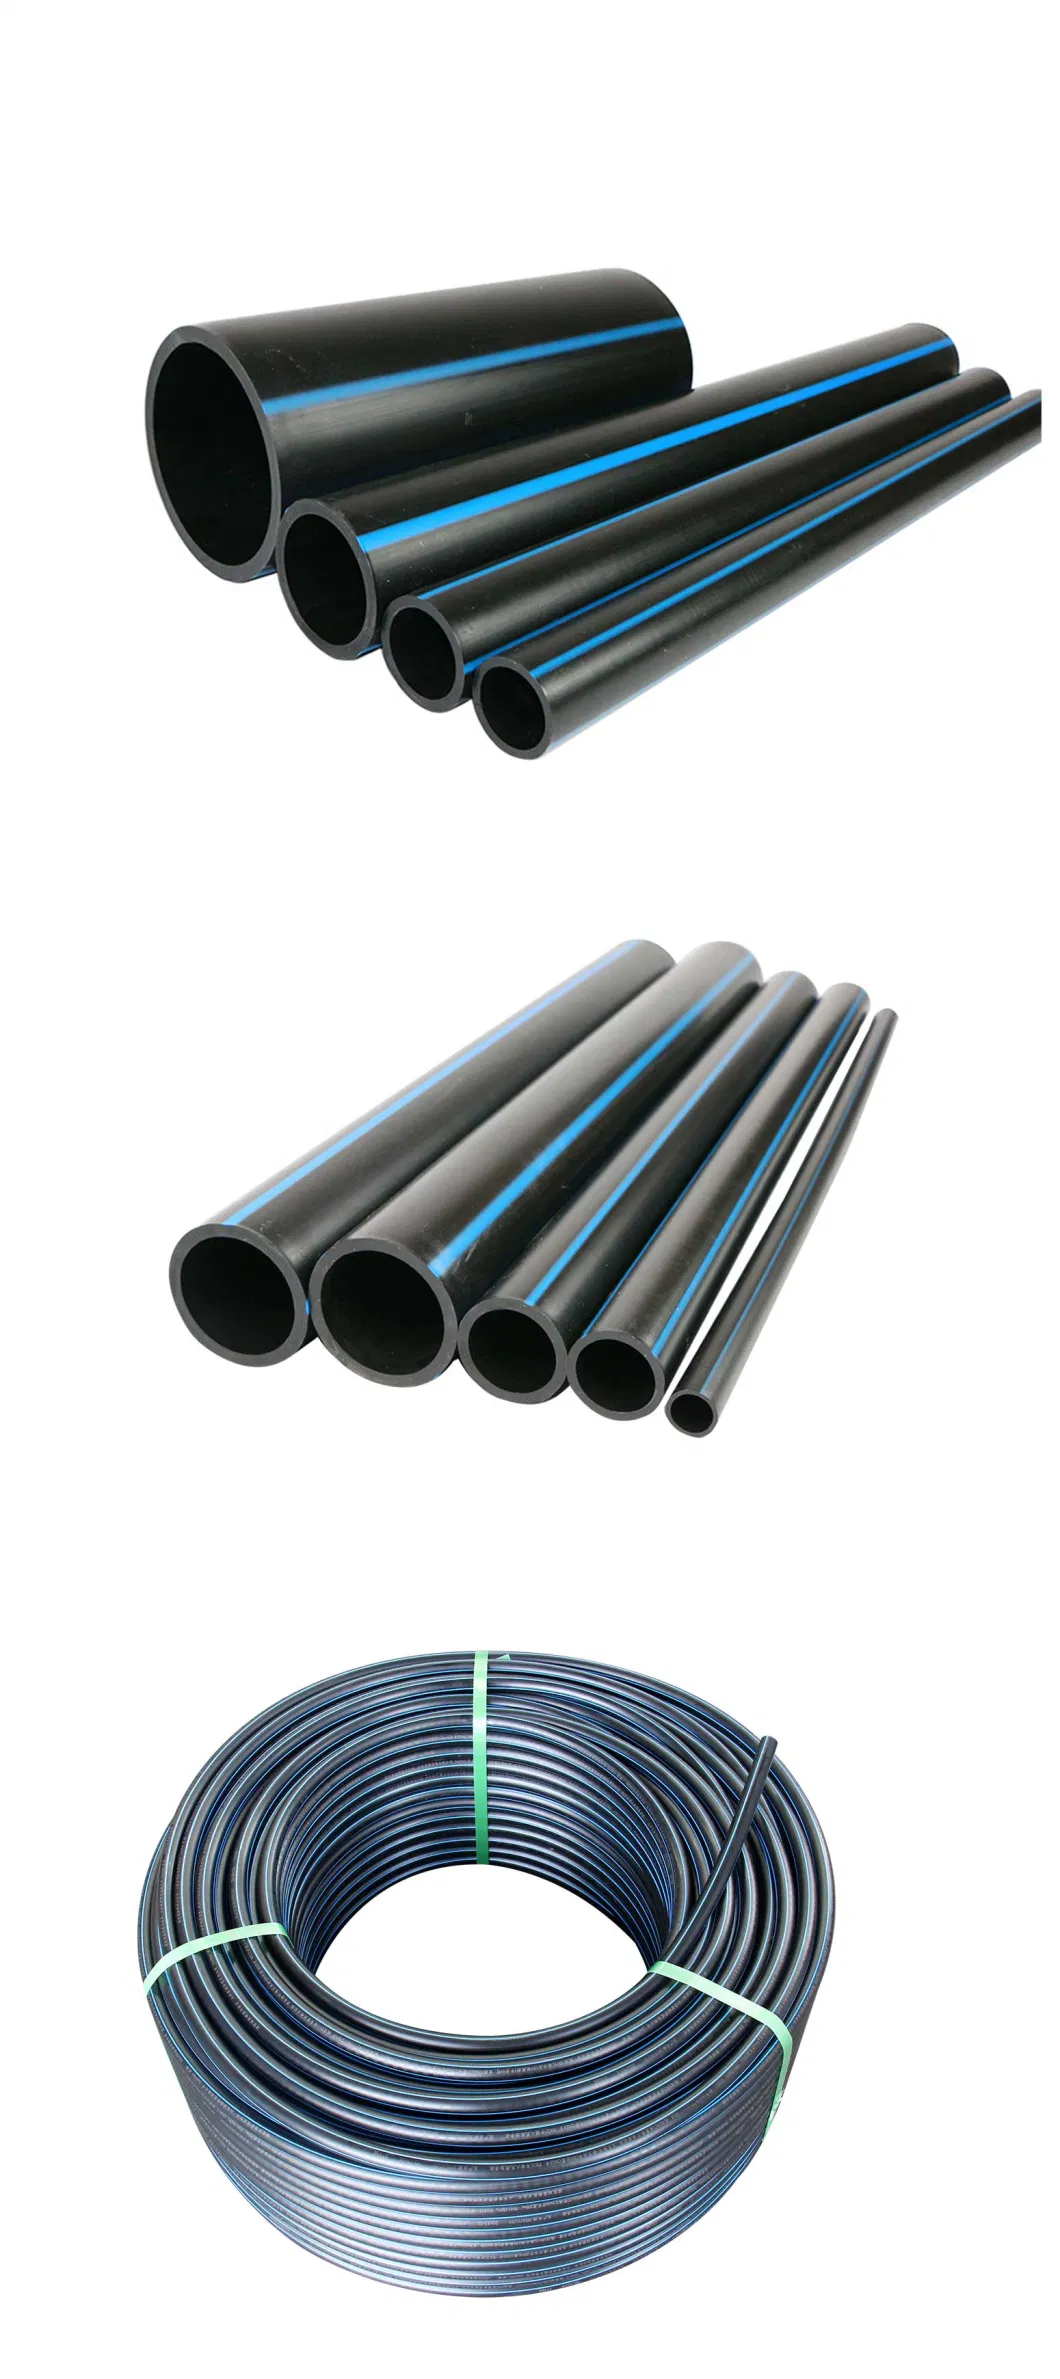 HDPE Pipe 110mm 90mm SDR17 SDR11 Pehd Pipe PE Pipe Plastic Pipe Water Pipe for Water Supply